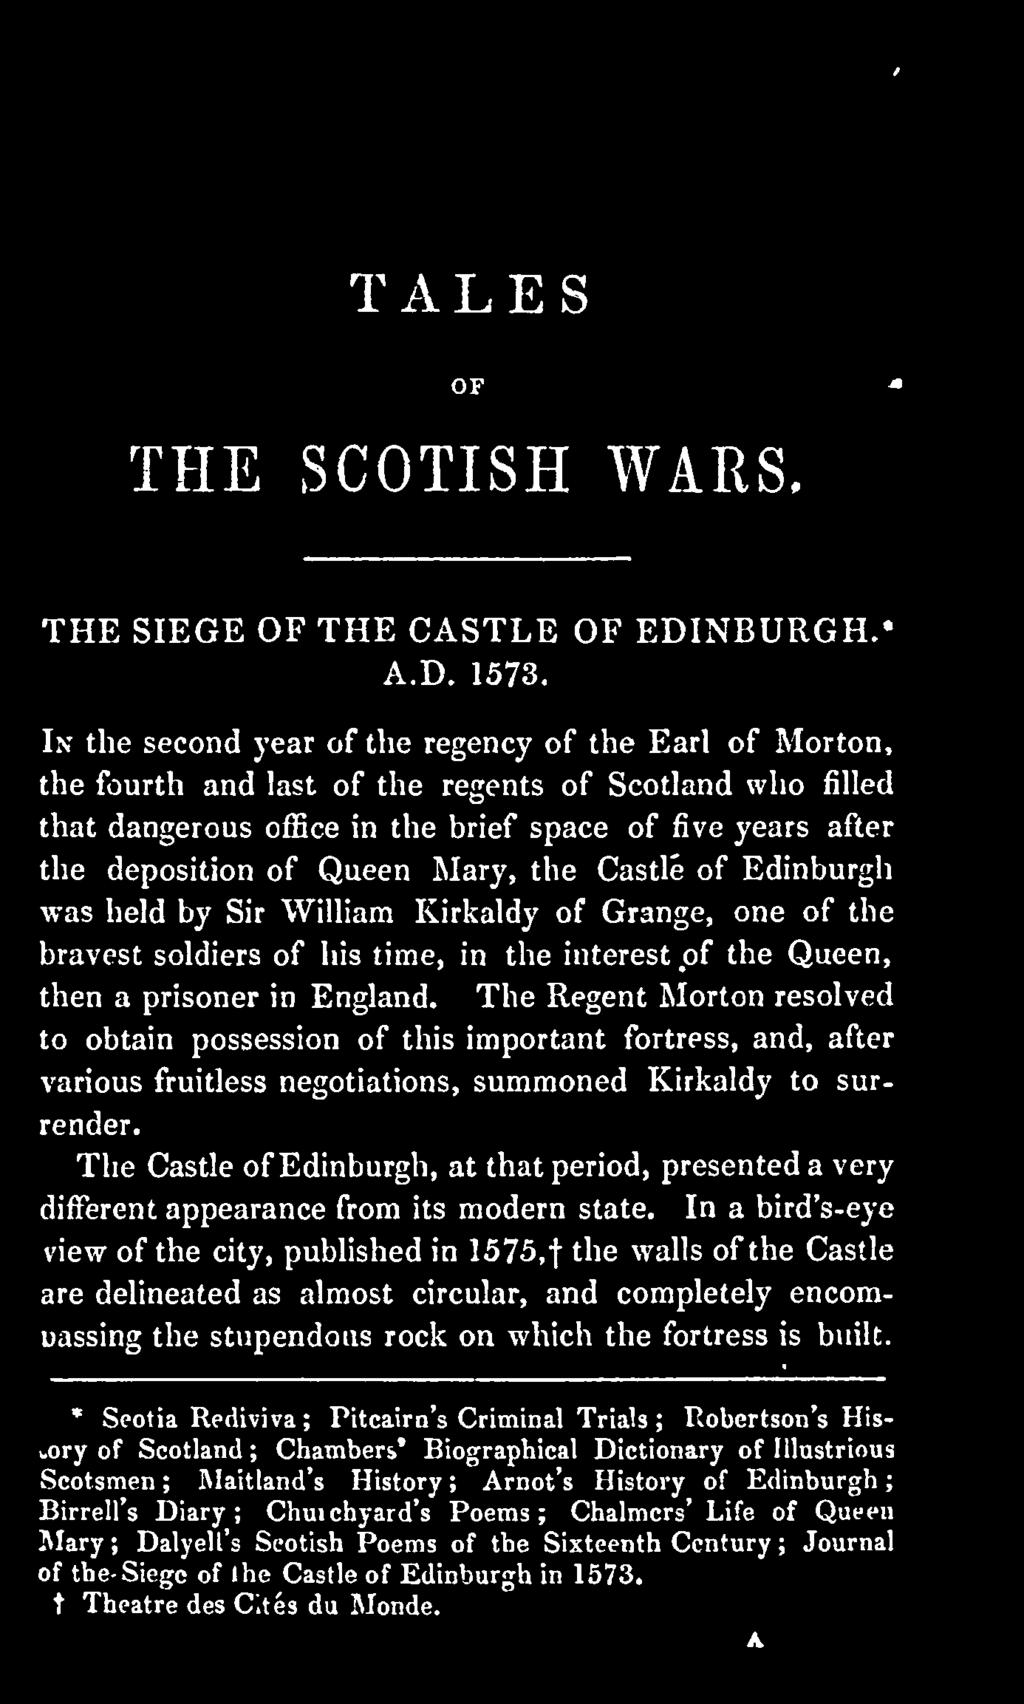 The Castle of Edinburgh, at that period, presented a very different appearance from its modern state.